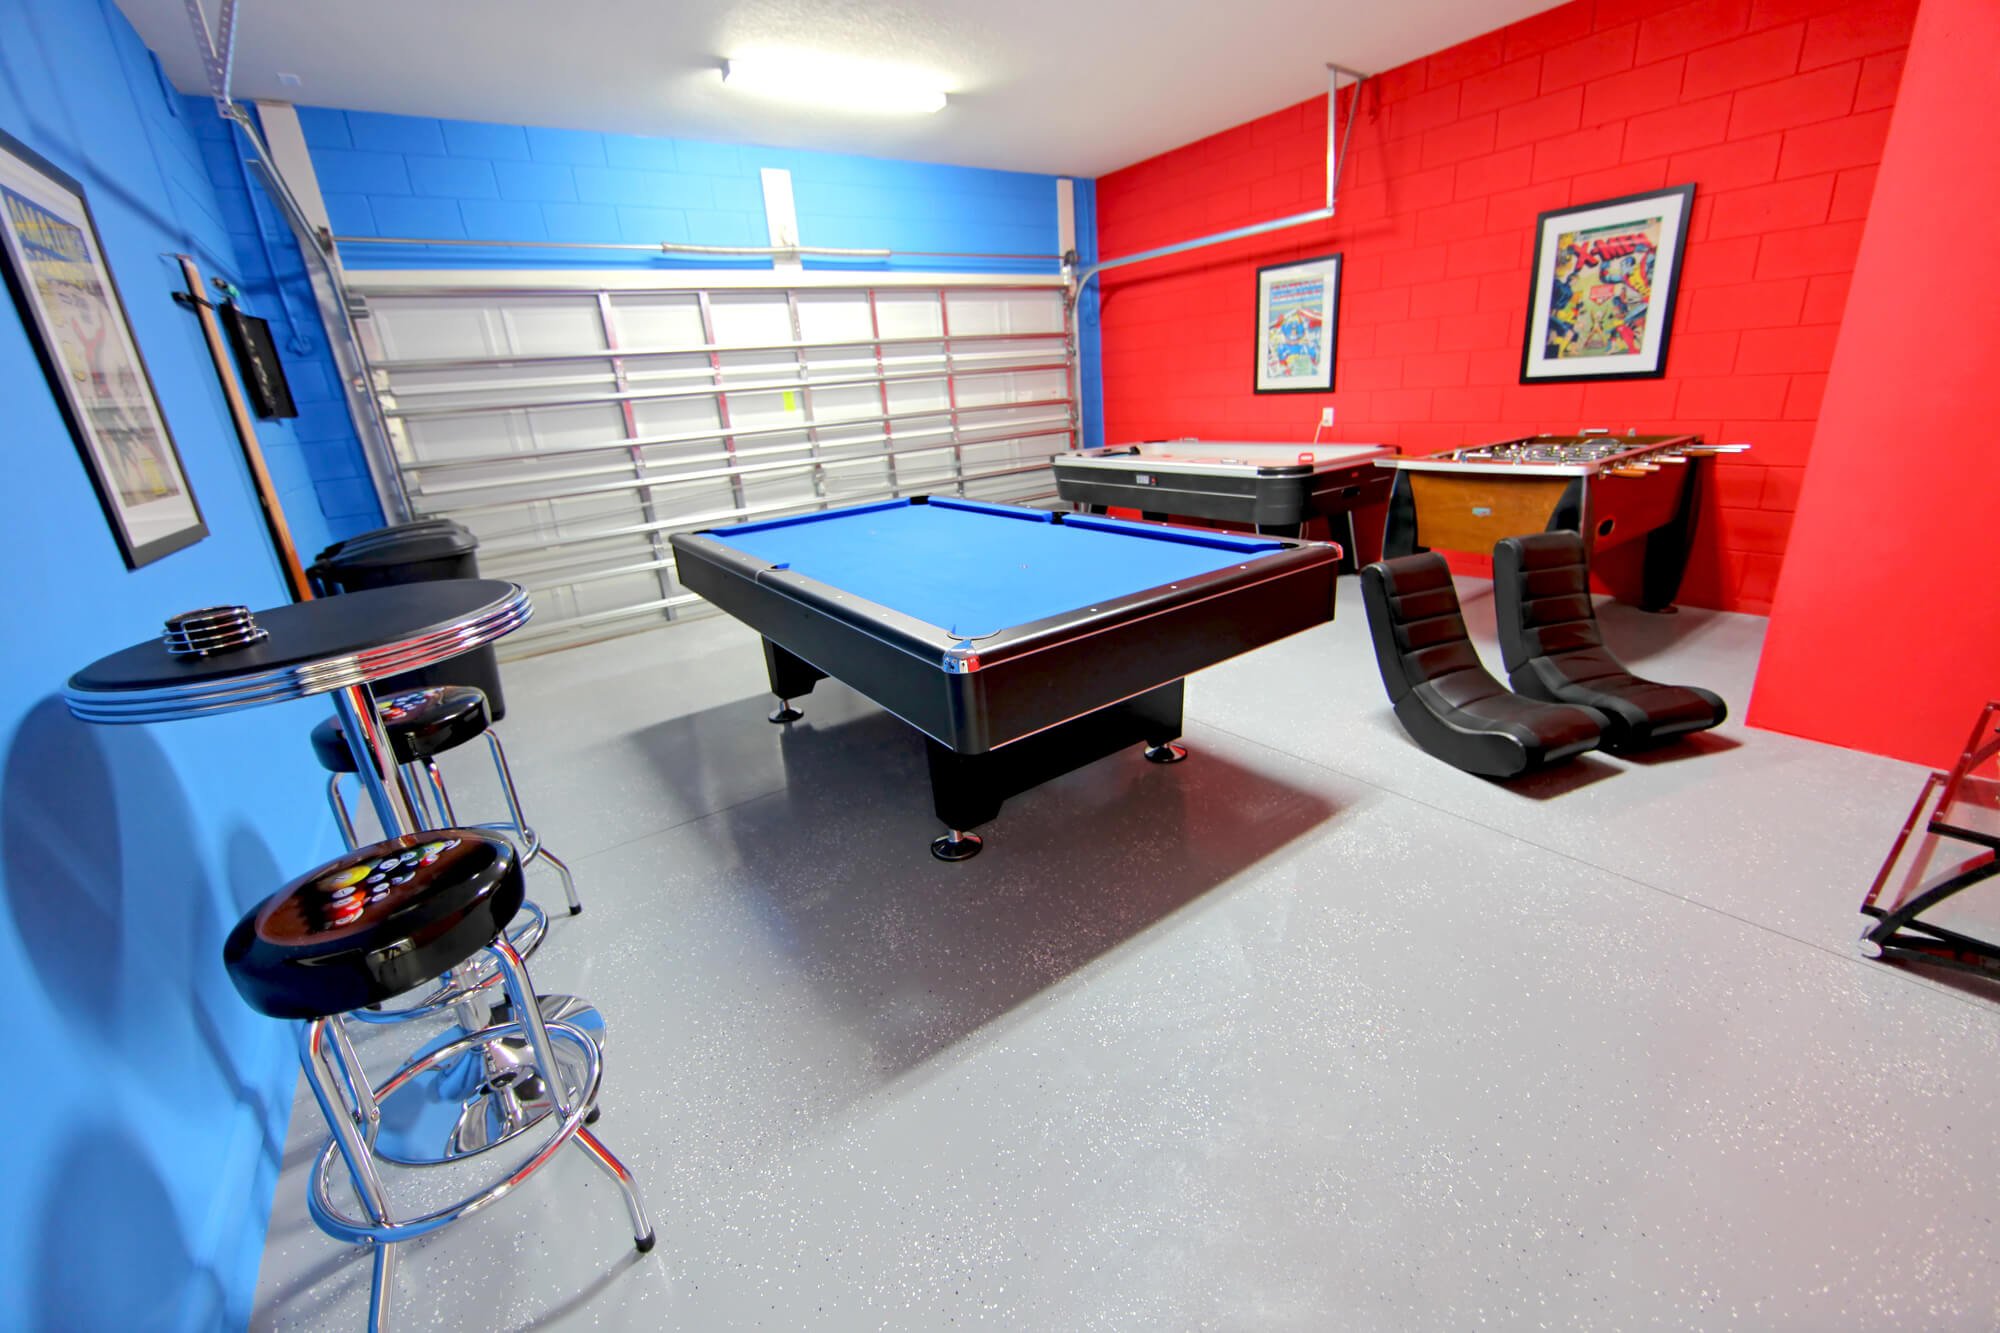 Billiards in a game room